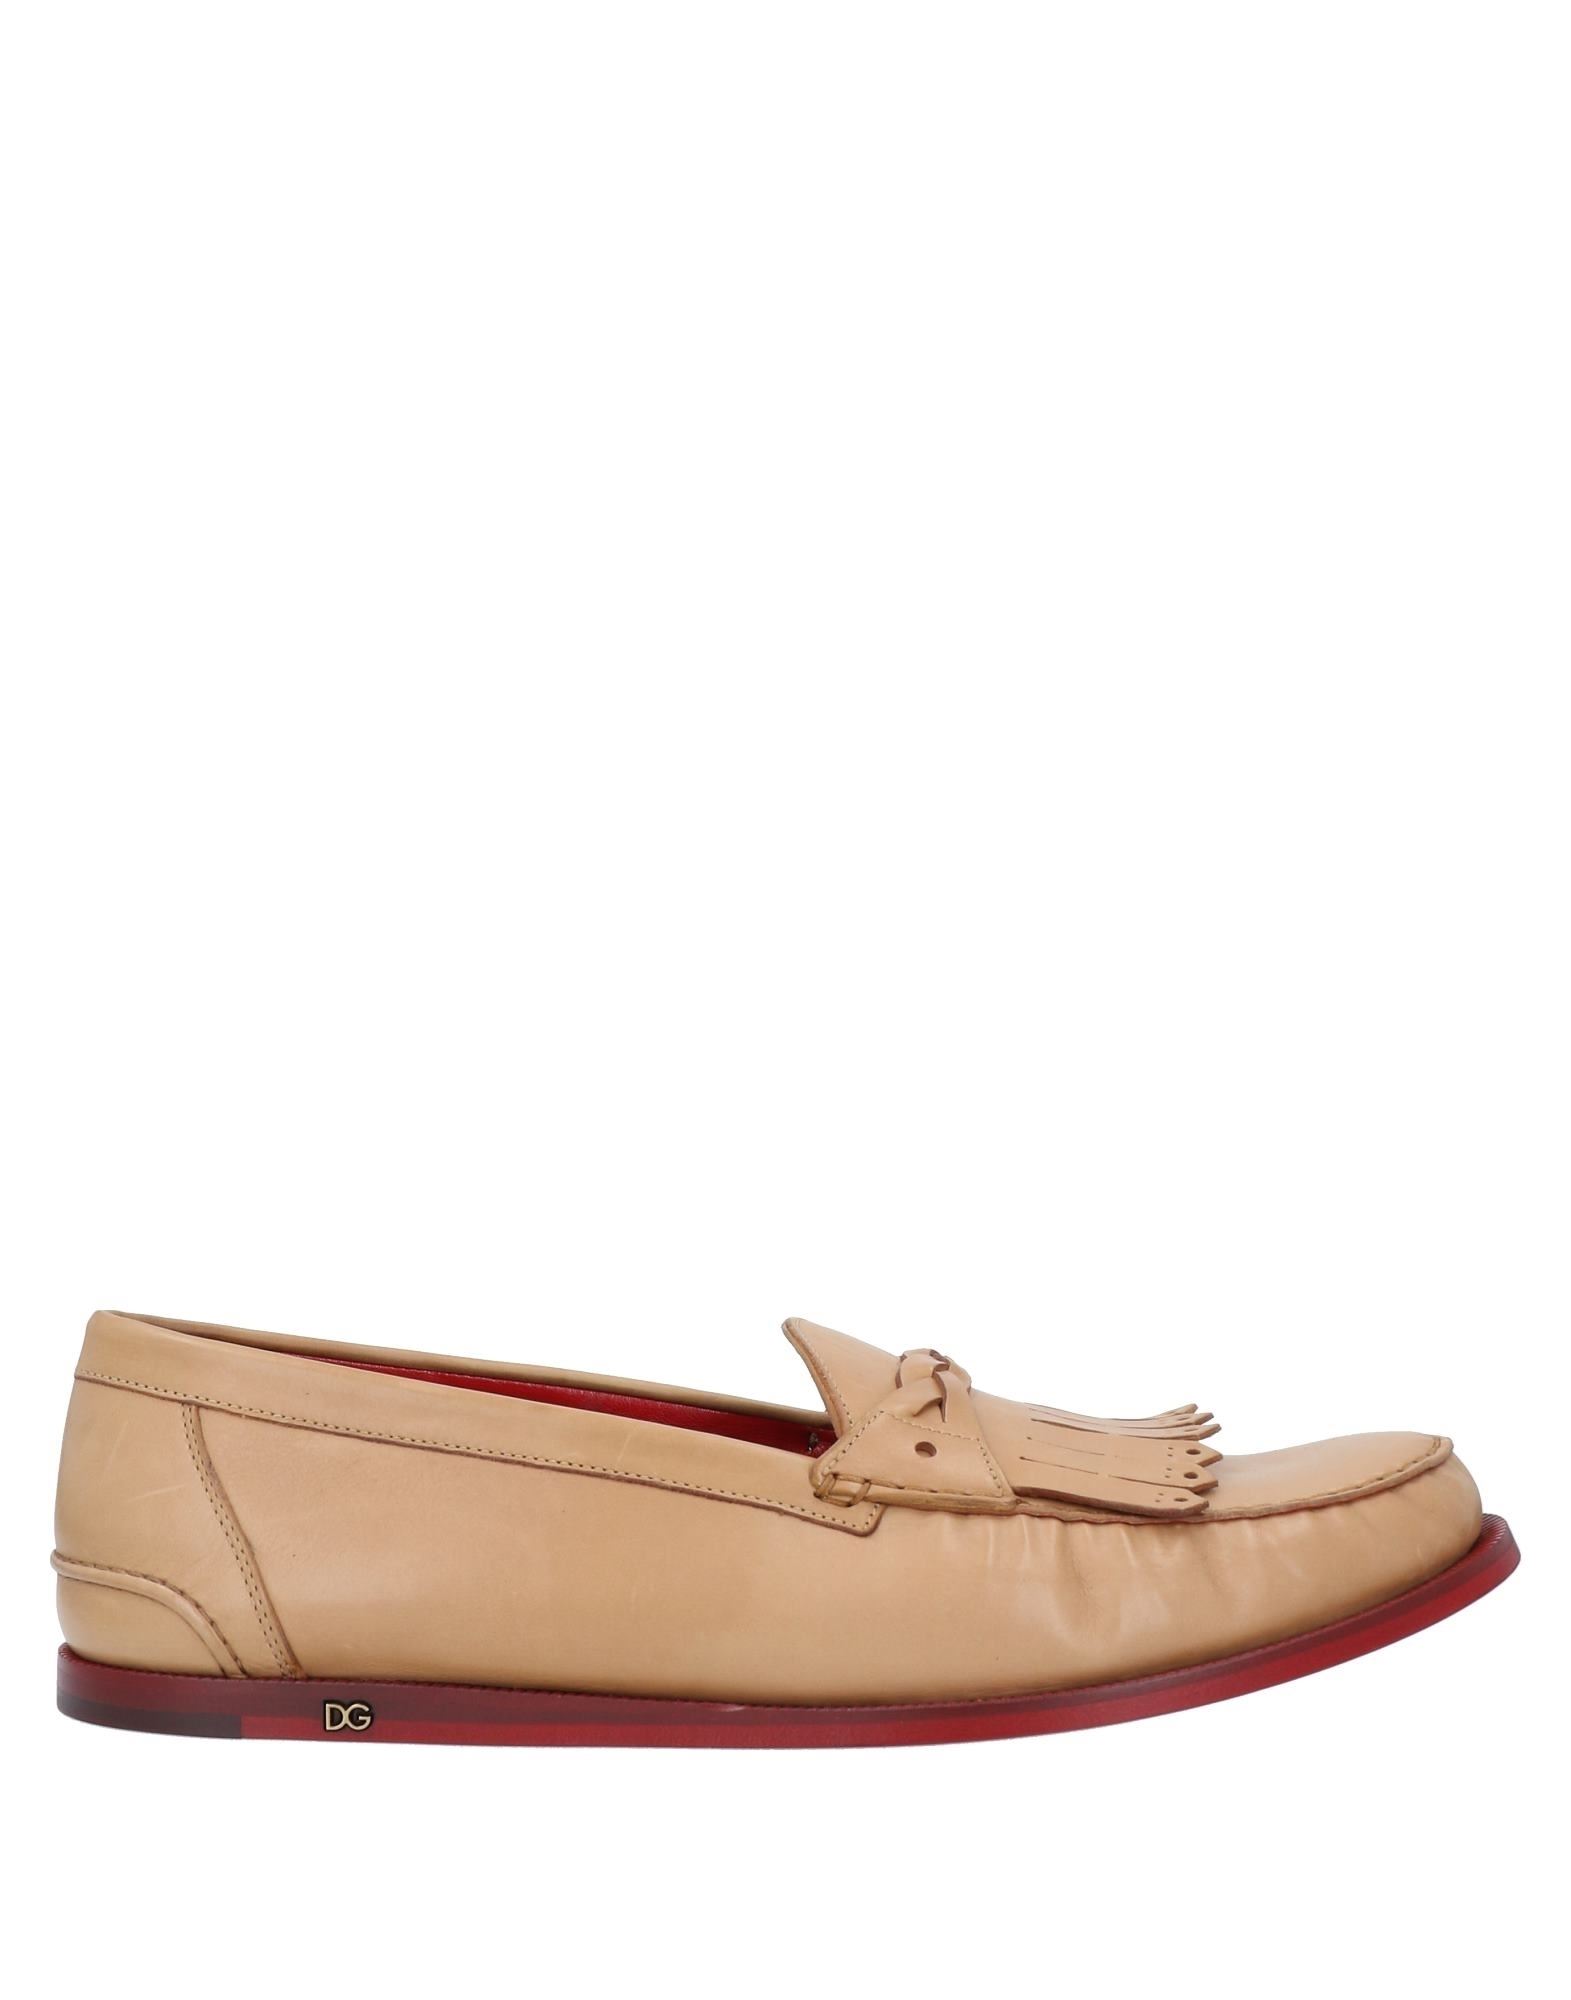 Dolce & Gabbana Loafers In Camel